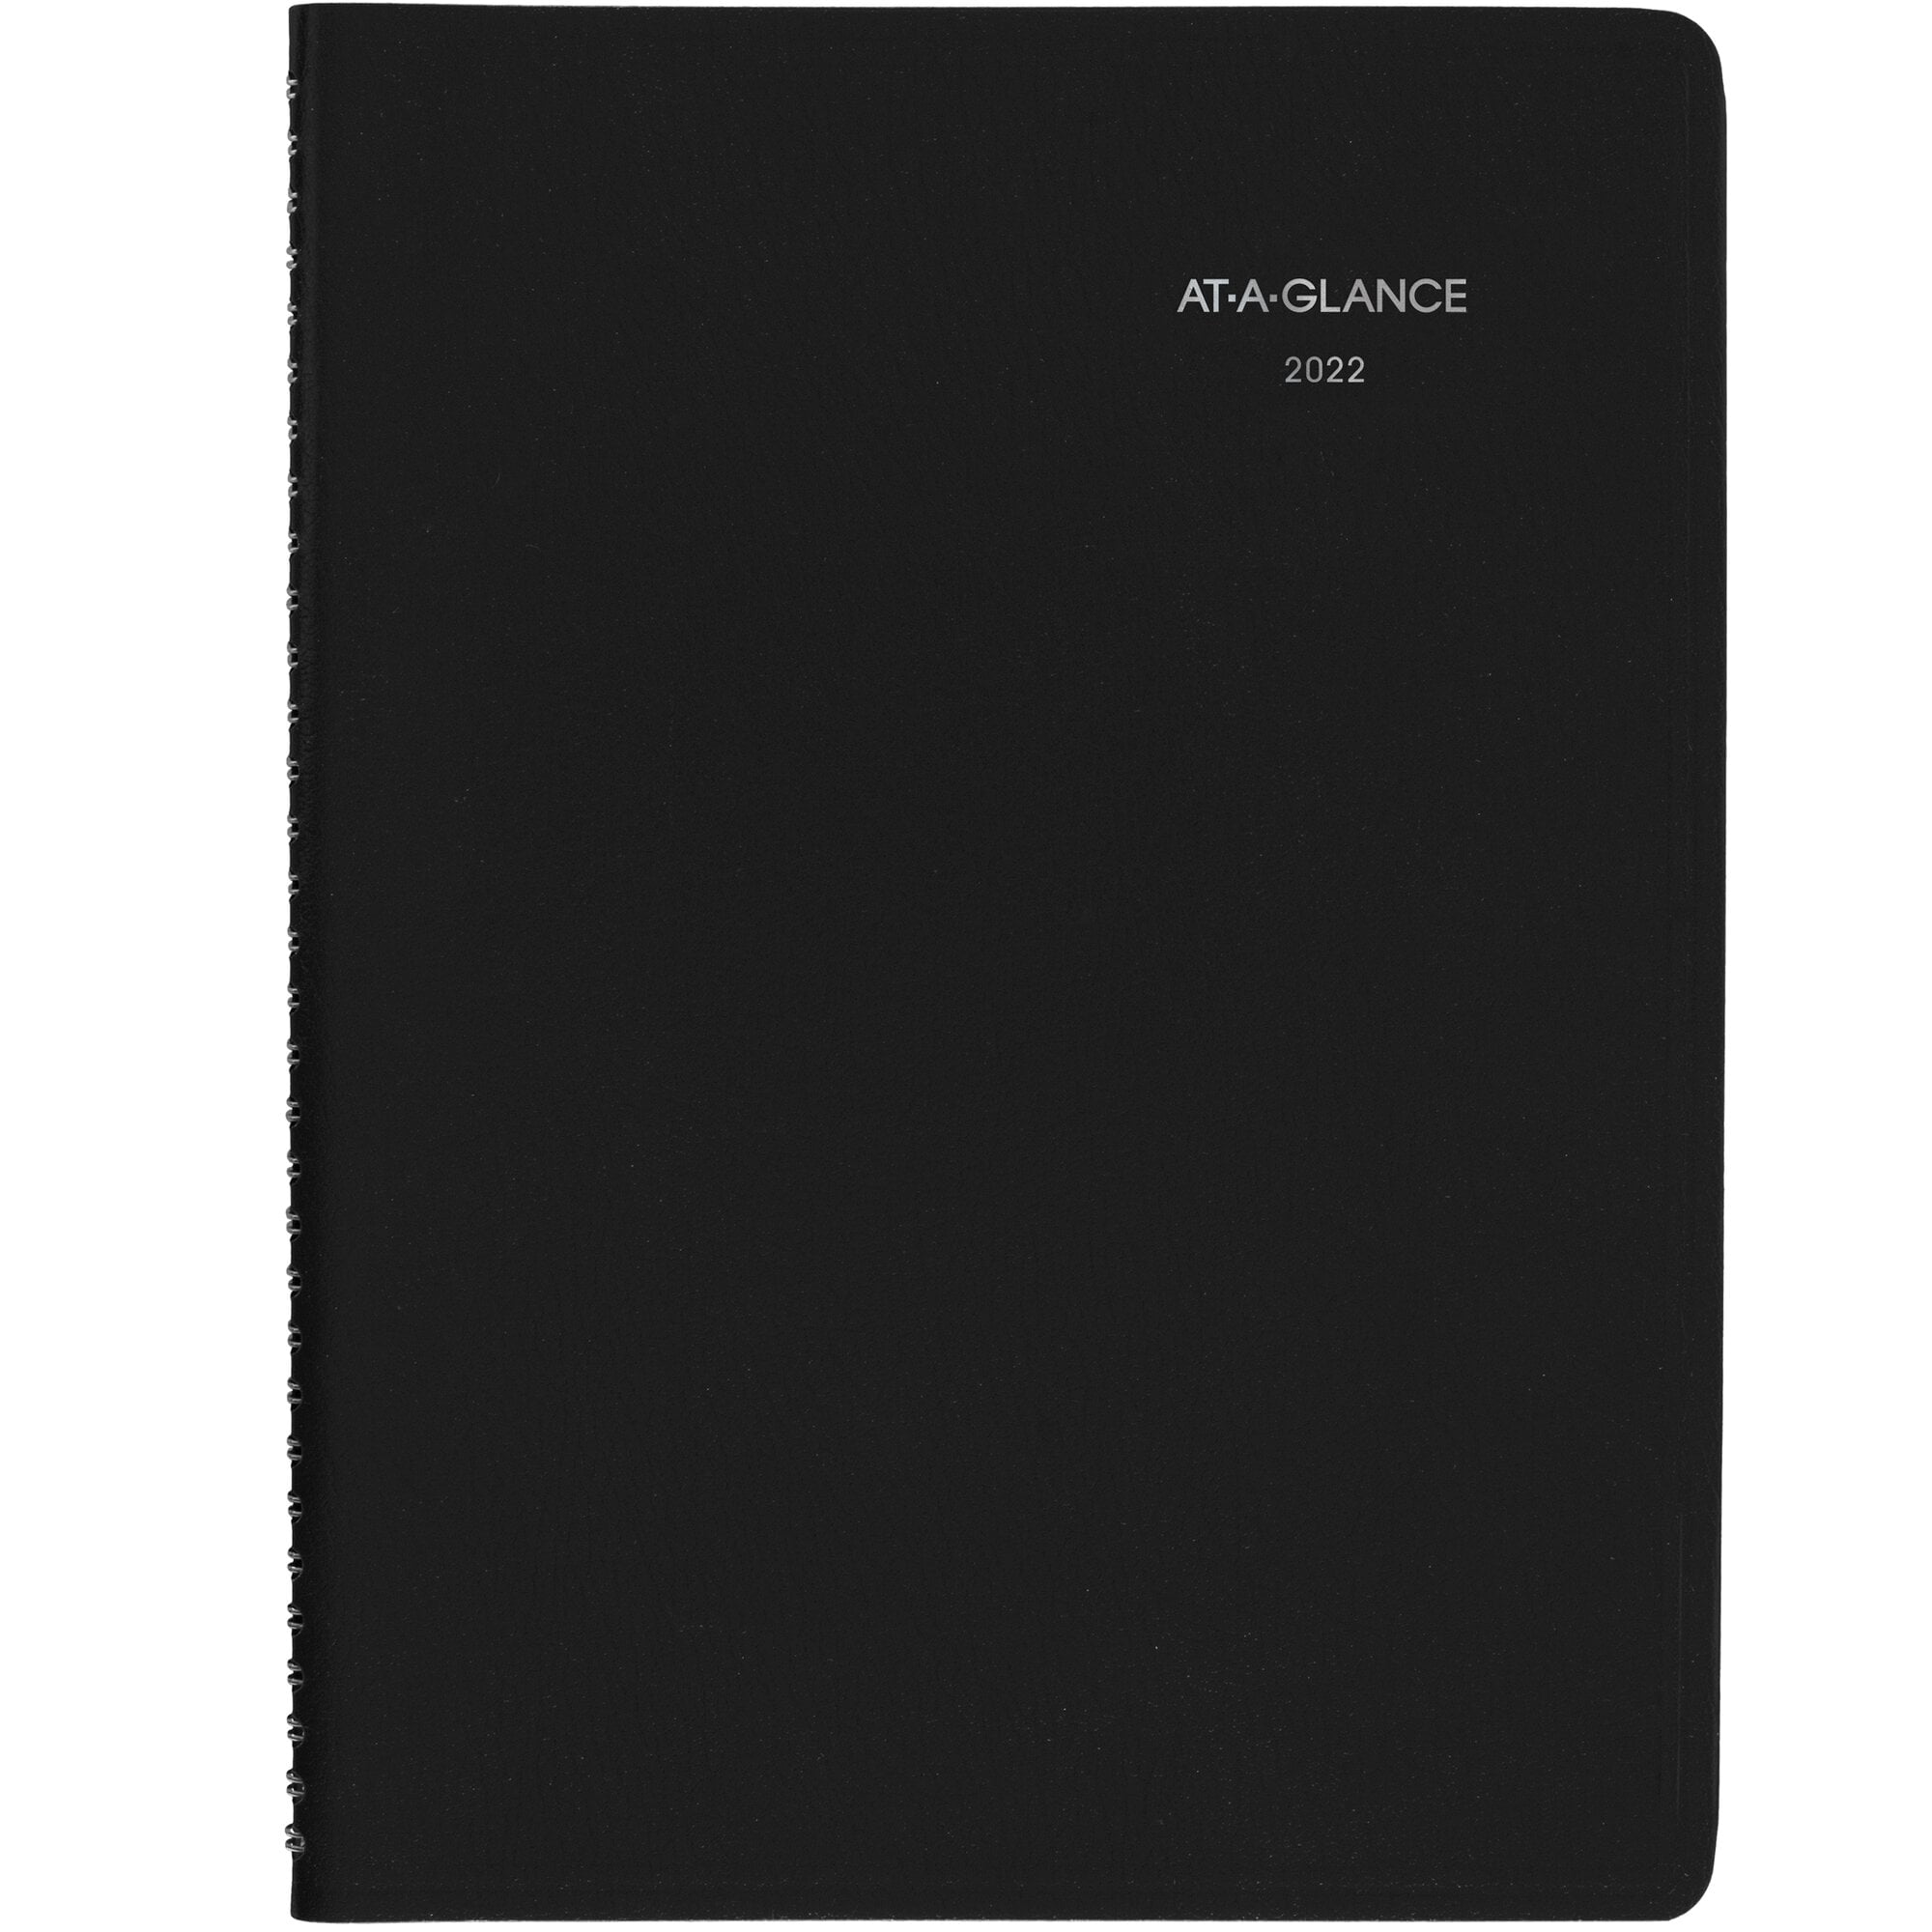 DayMinder Large 2022 Weekly Appointment Book & Planner by AT-A-GLANCE Large & Appointment Book & Planner by AT-A-GLANCE G52000 7095020 8-1/4 x 11 Navy Black 8 x 11 